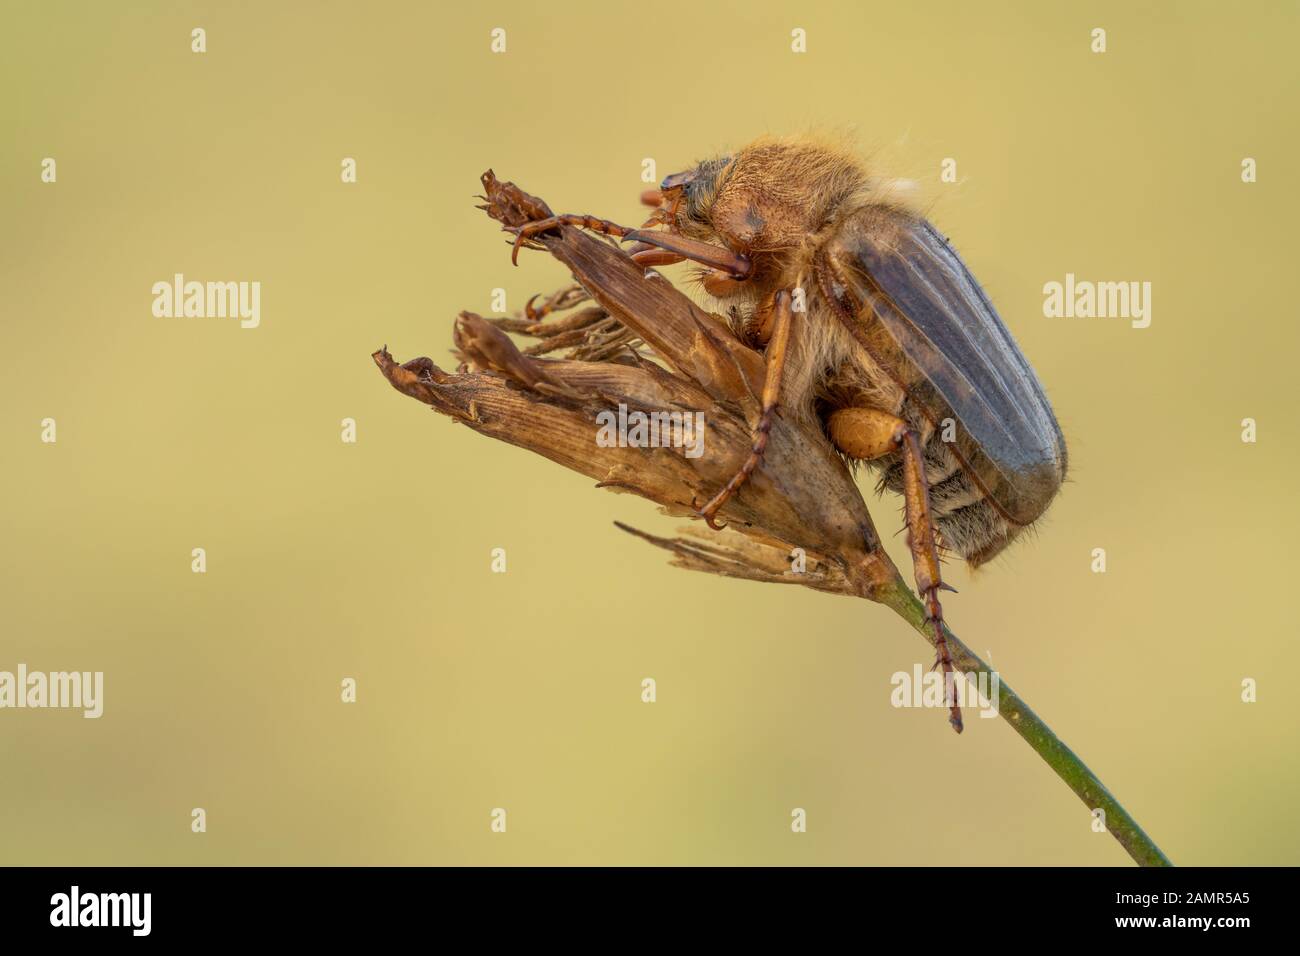 Small June Beetle Amphimallon solstitiale sitting on the plant, in Czech Republic Stock Photo